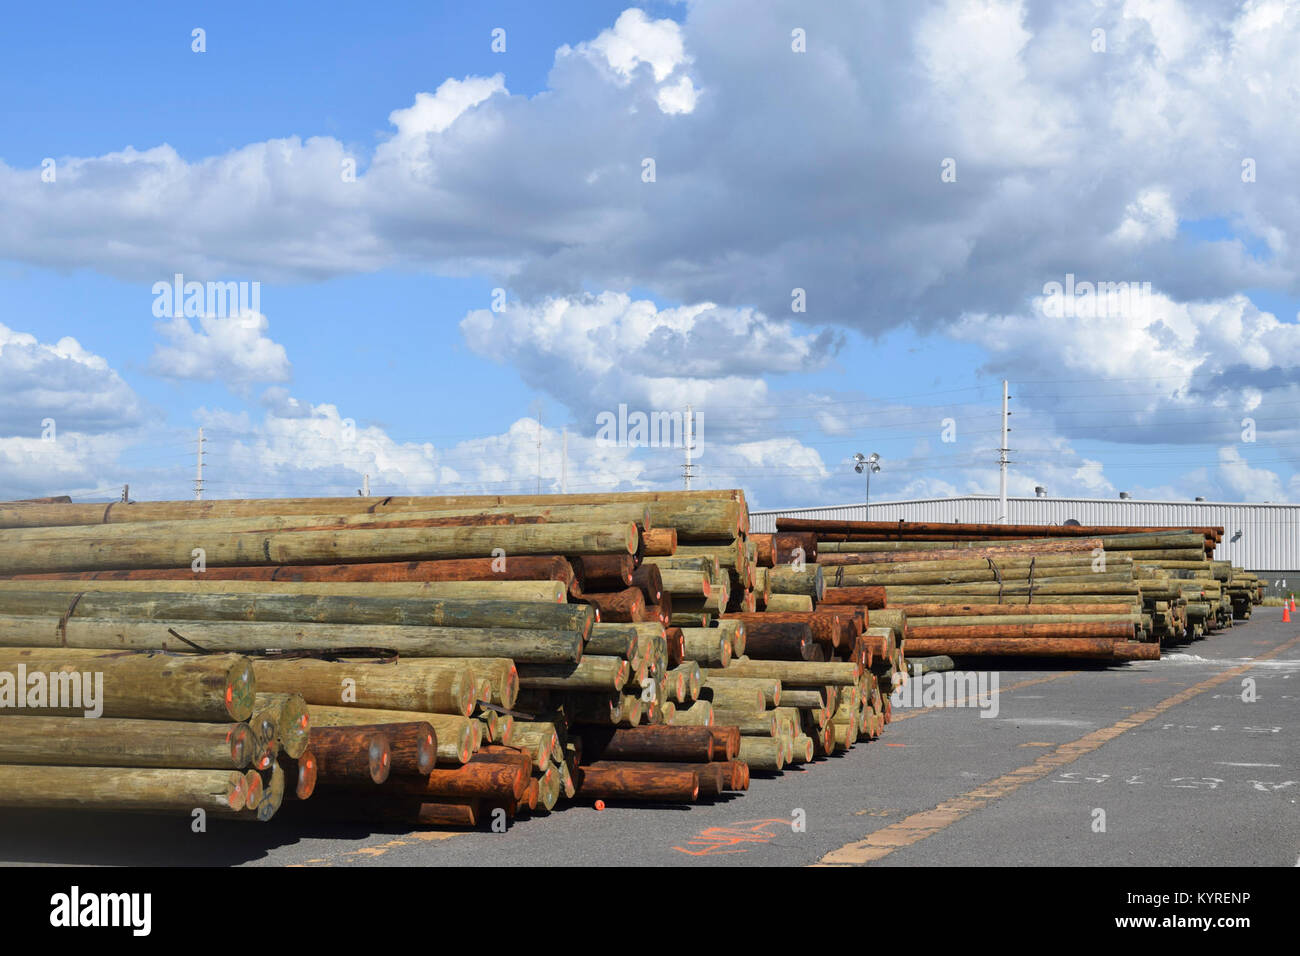 ponce-puerto-rico-pressure-treated-wooden-utility-poles-are-unloaded-KYRENP.jpg